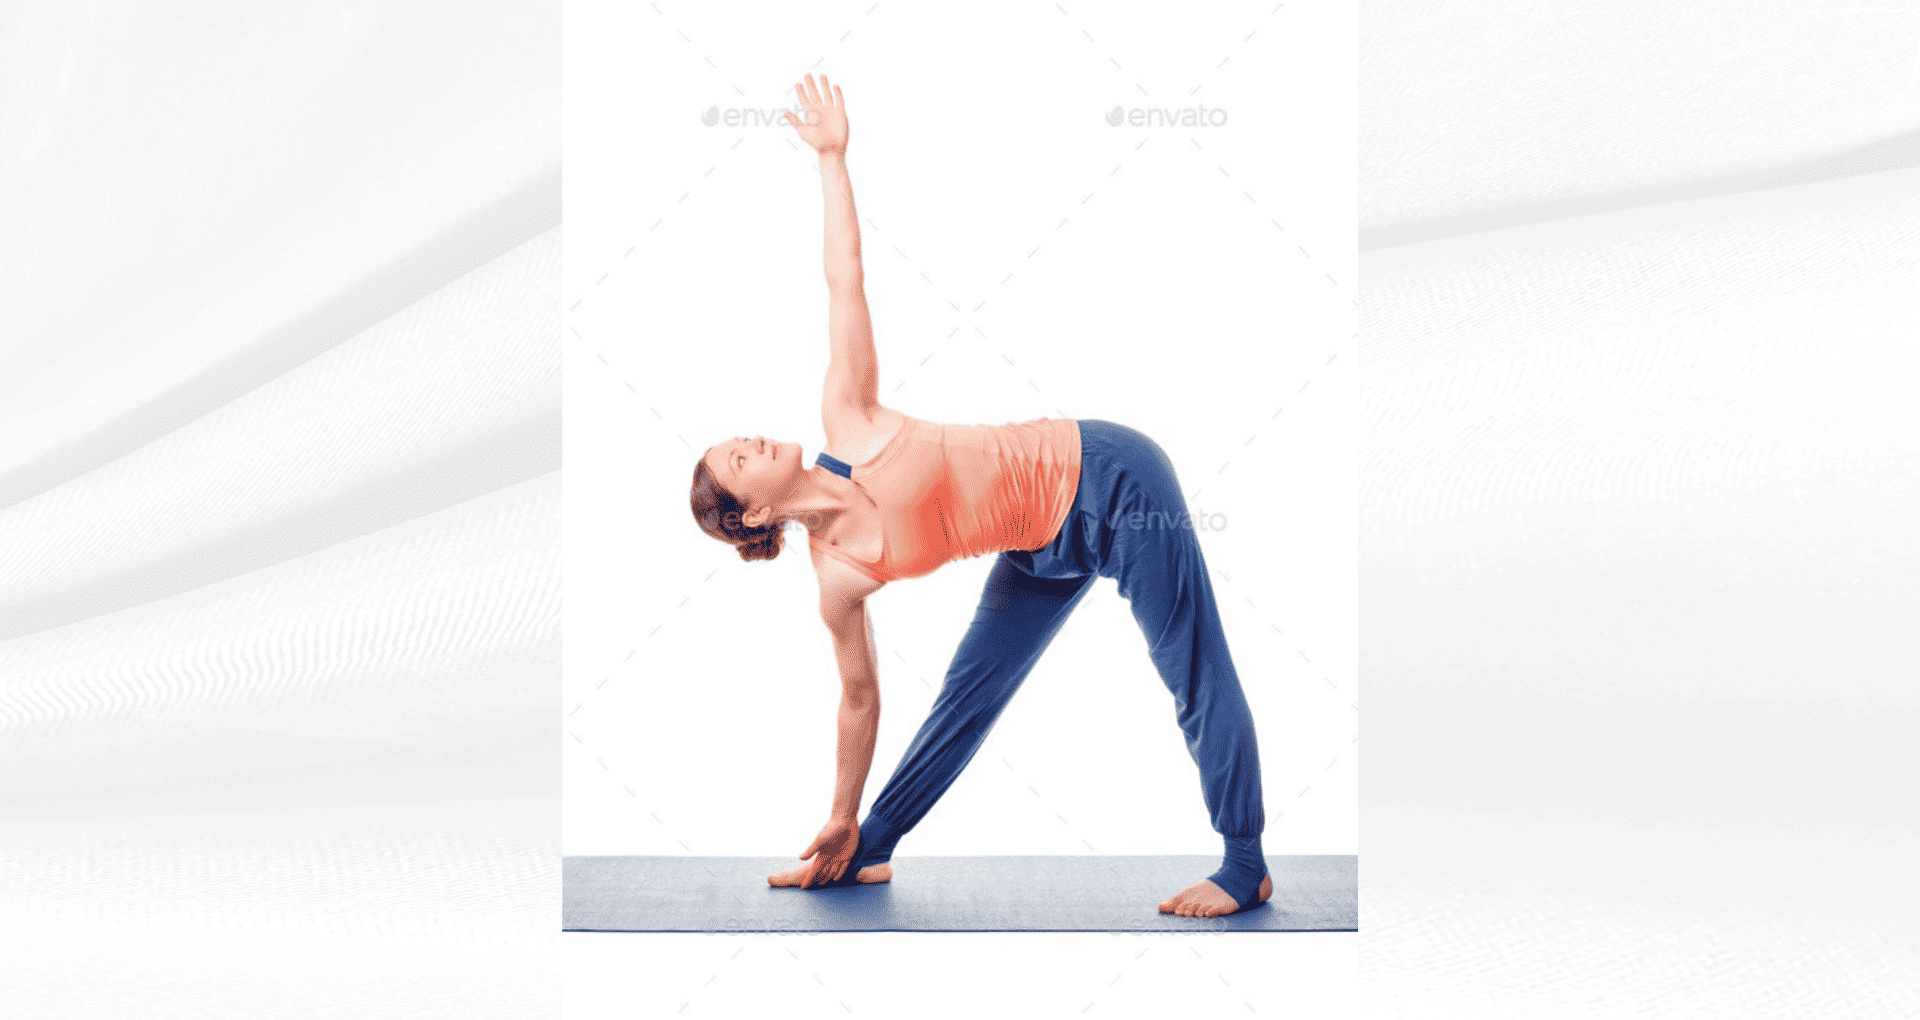 Artistic Yoga - Yoga poses for beginners Mountain Pose – Tadasana Steps  Stand straight with feet together. Keep a small distance between two feet  and relax. While taking a deep breath, stand